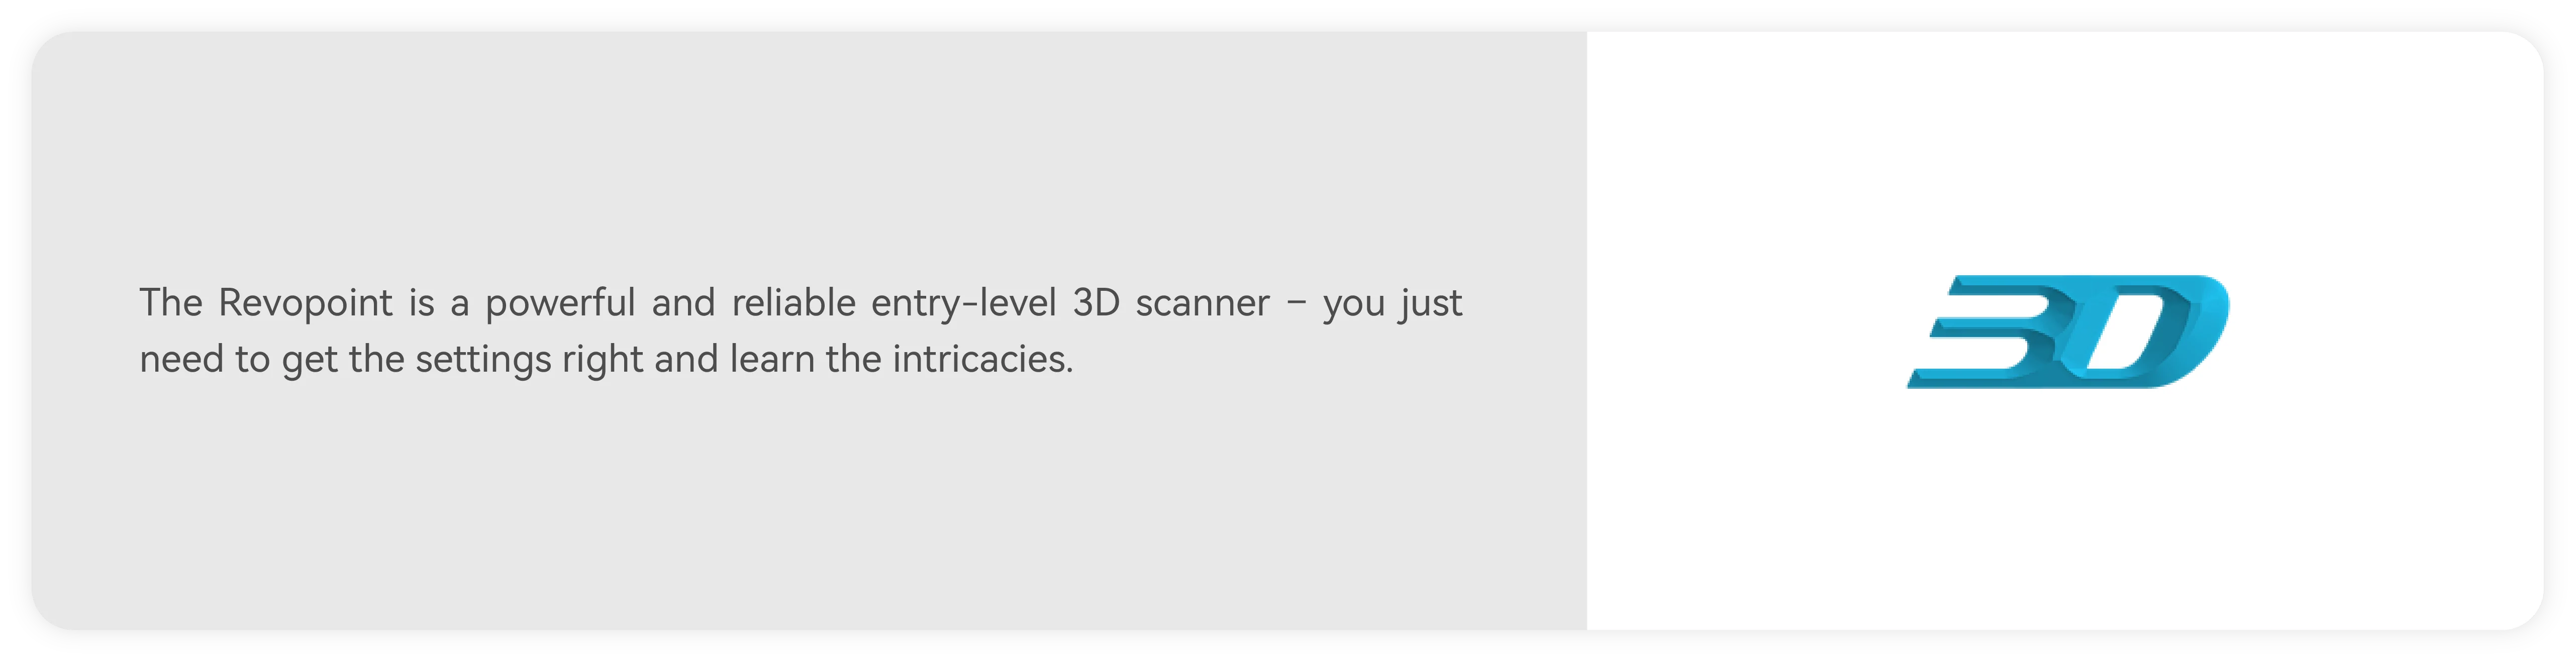 Revopoint 3d scanner review